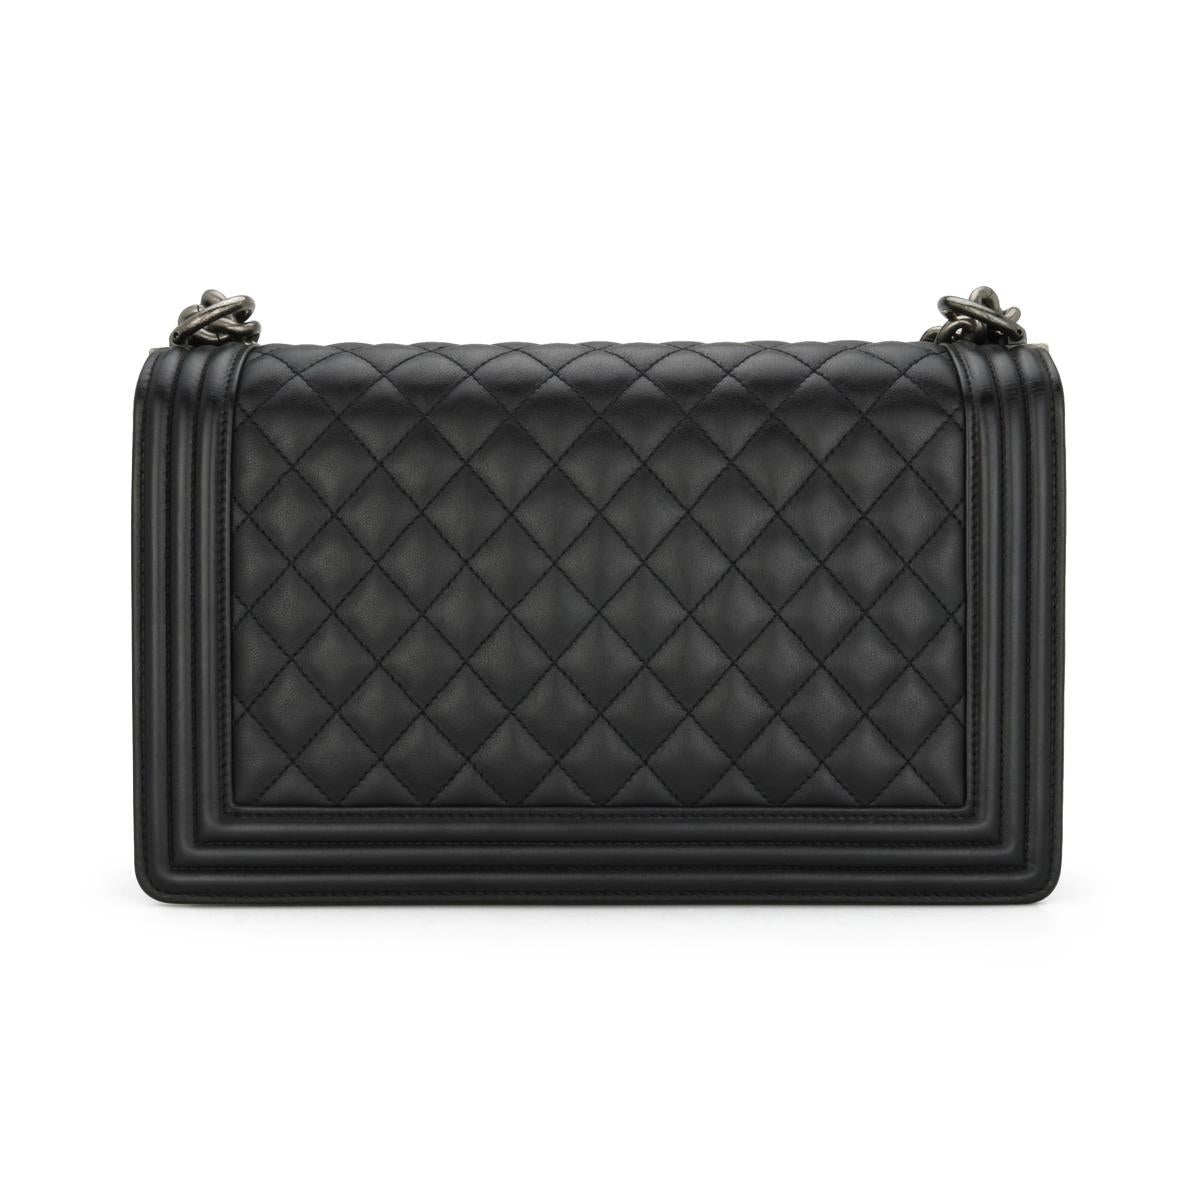 CHANEL New Medium Quilted Boy Bag in Black Calfskin with Ruthenium Hardware 2015 In Good Condition For Sale In Huddersfield, GB